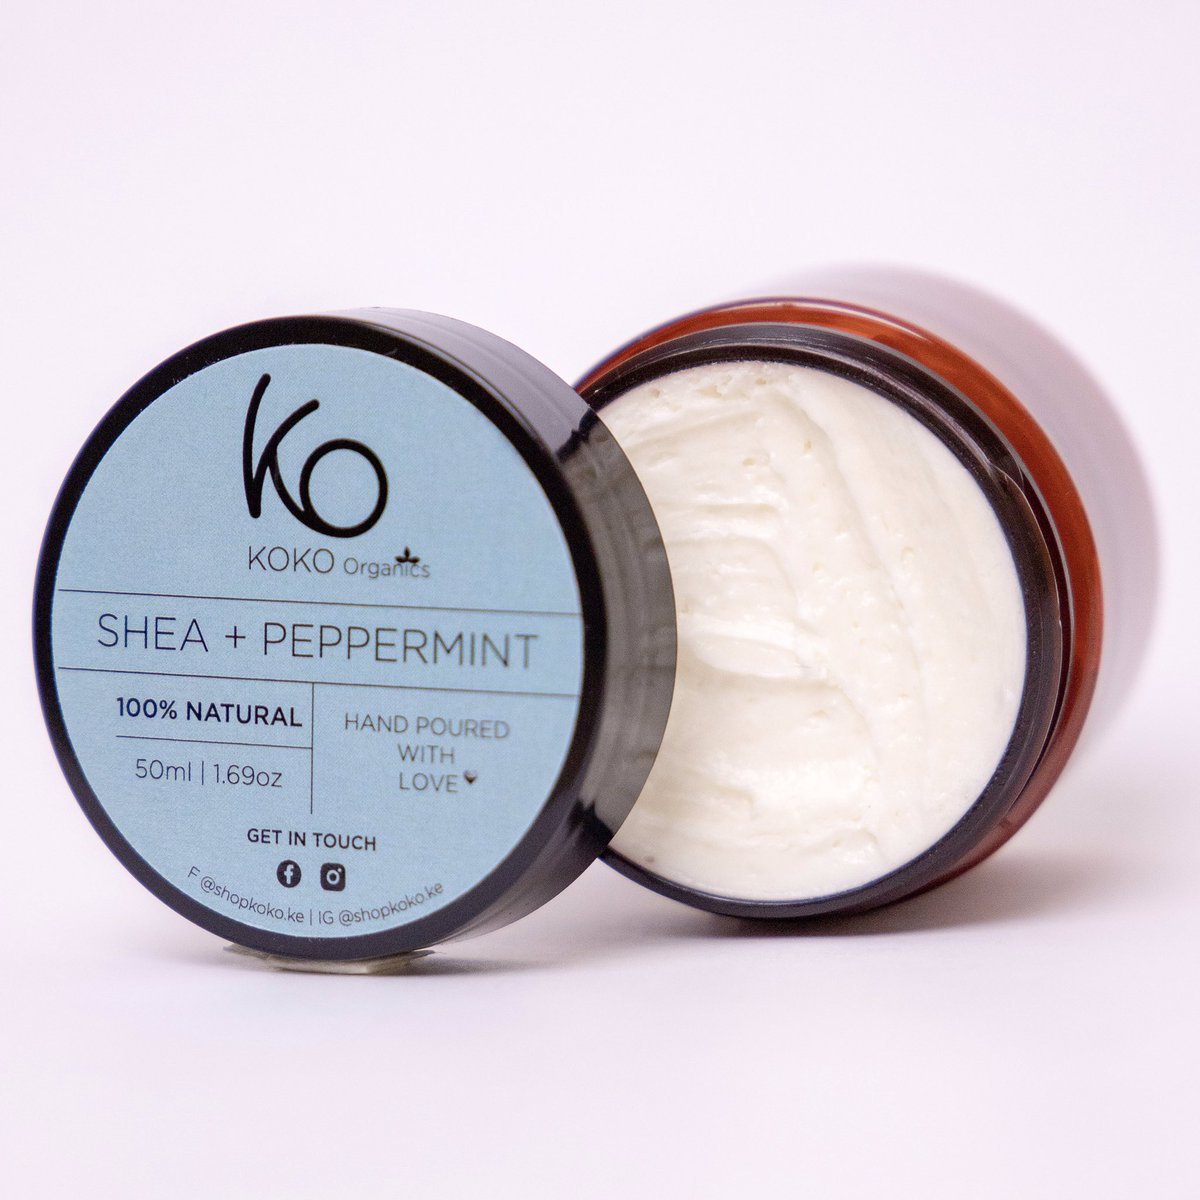 ✨Shea + Peppermint 🍃✨. Our refreshing new scent, available also in 50ml jars. 

#100%Natural #Organic #ColdPressed 
#SheaButter #PeppermintEssentialOil
 #SkinCare #HairCare #SkinEssentials #HairEssentials #HandPoured
#MadeWithLove